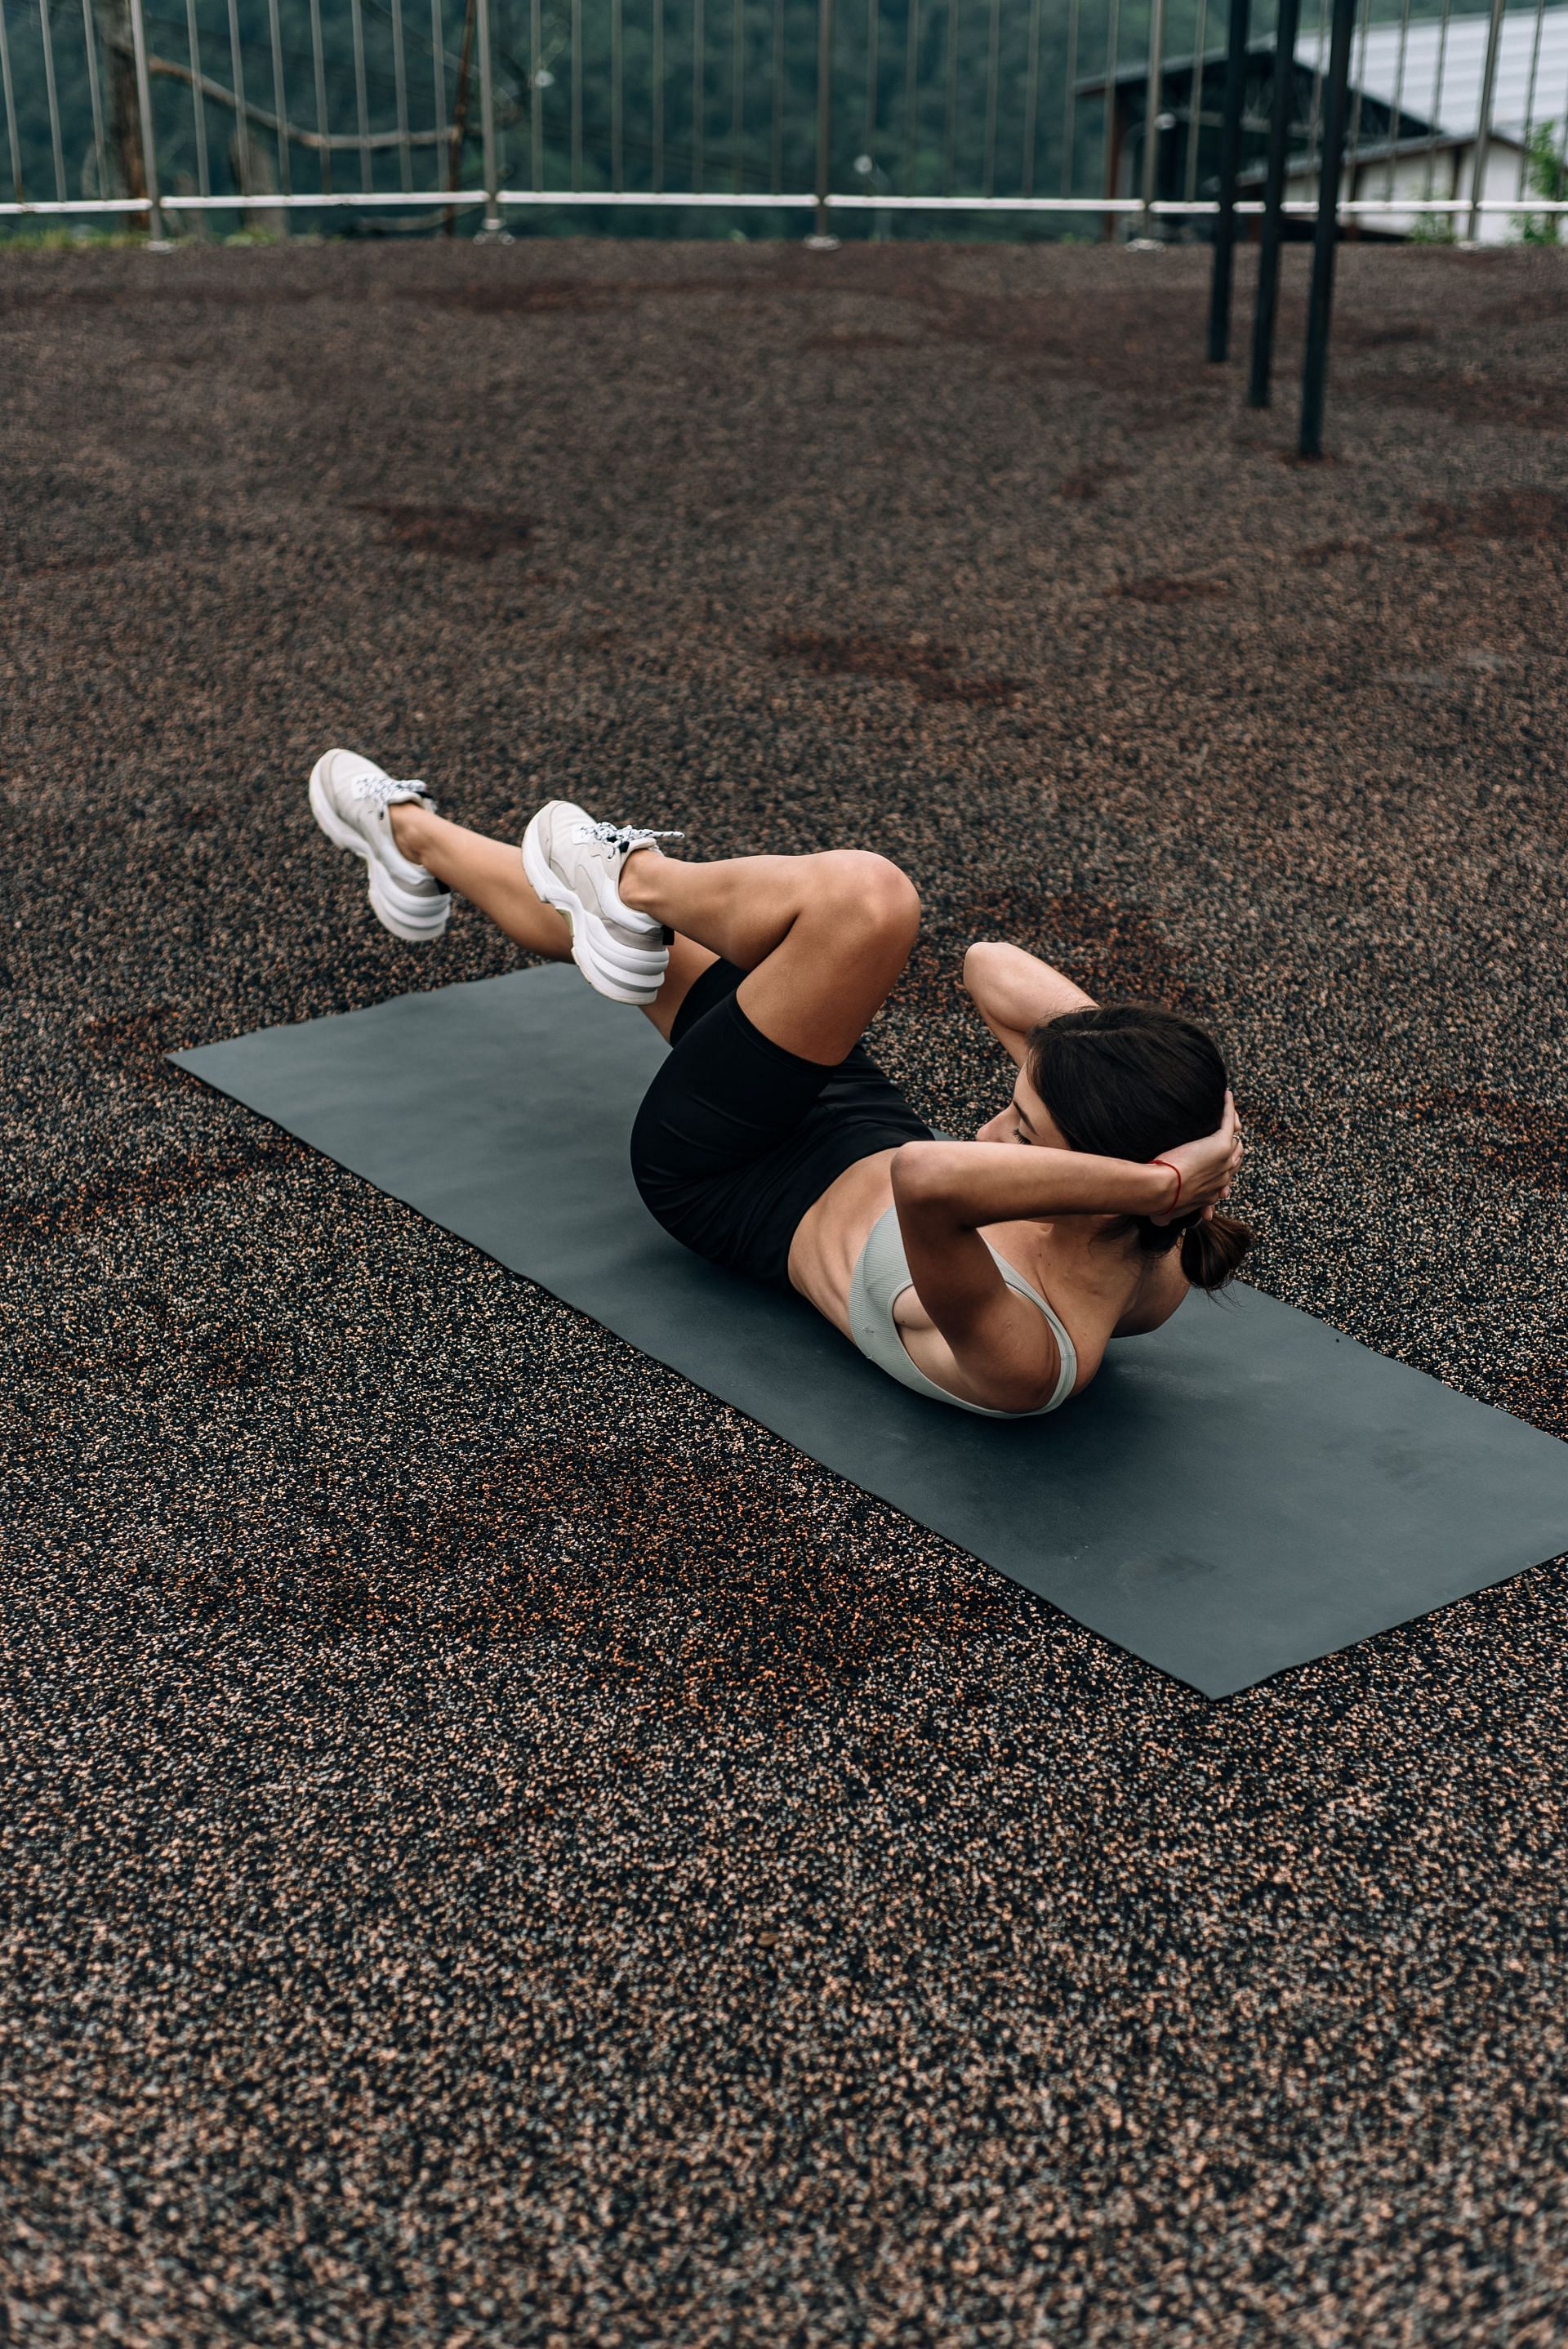 Bicycle crunches for chiseled abs. (Image via Pexels/ Odintsov) lifts for dreamy ab lines. (Image via Pexels/ Alexy Almond)